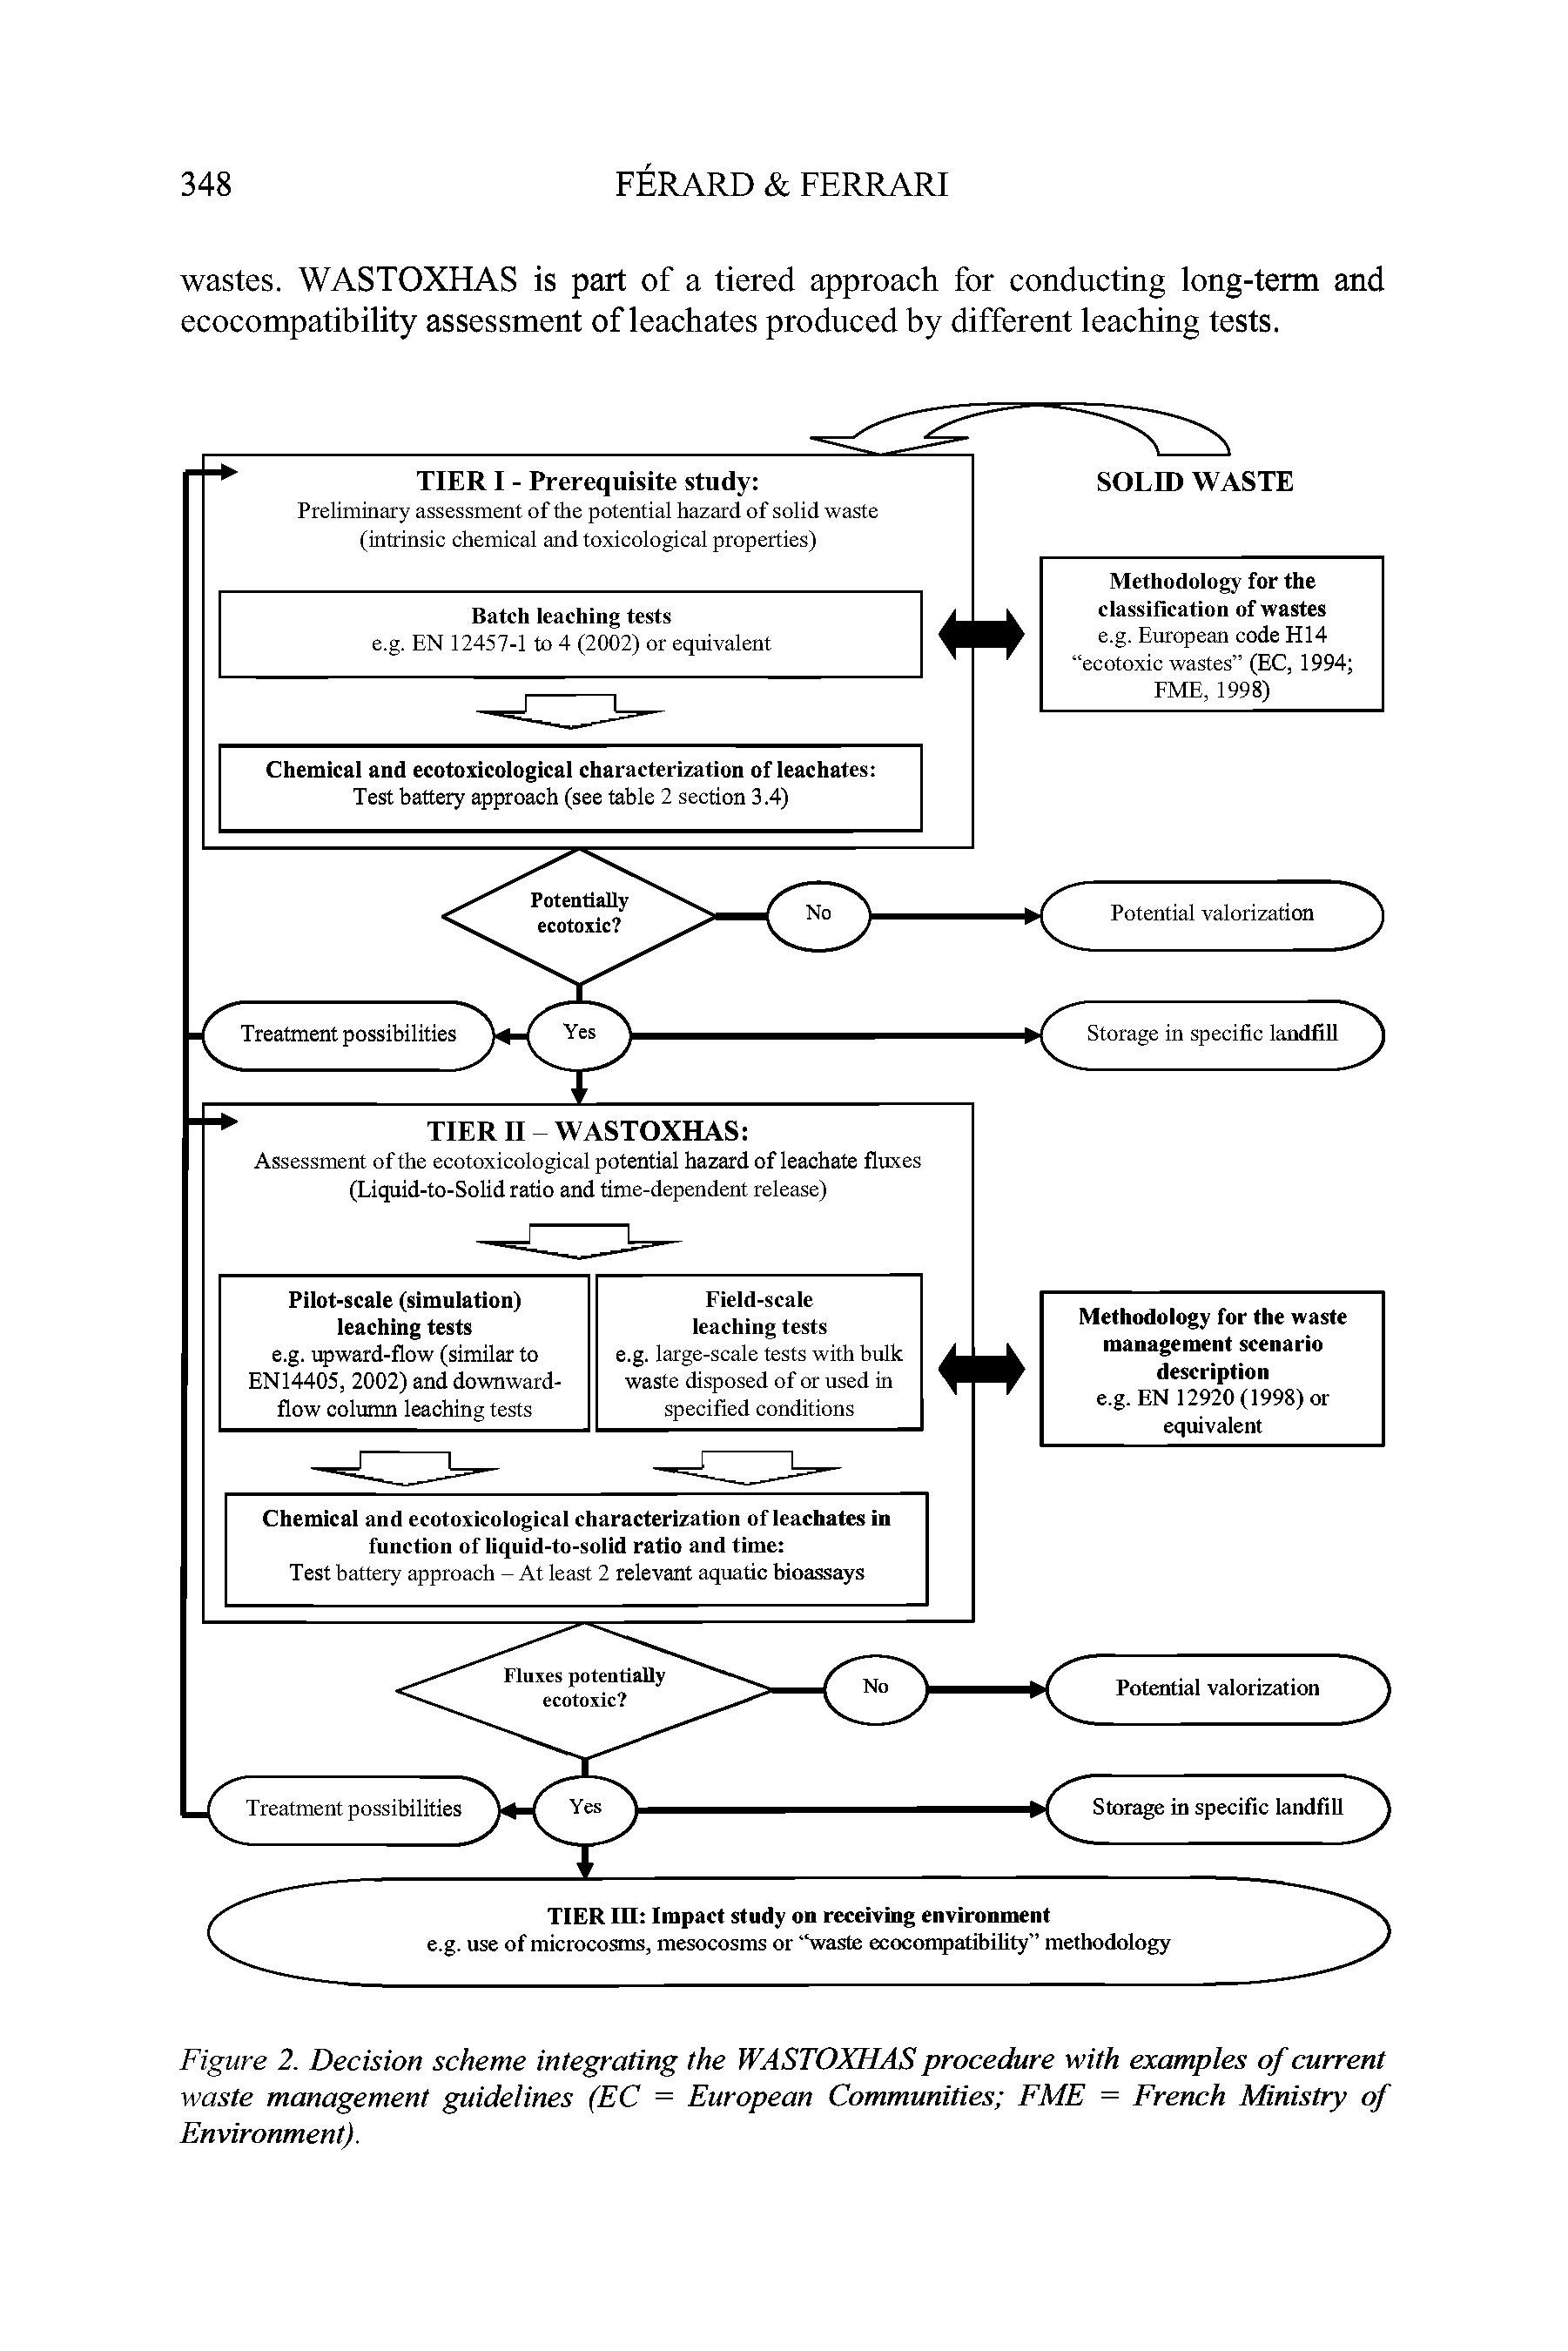 Figure 2. Decision scheme integrating the WASTOXHAS procedure with examples of current waste management guidelines (EC = European Communities FME = French Ministry of Environment).